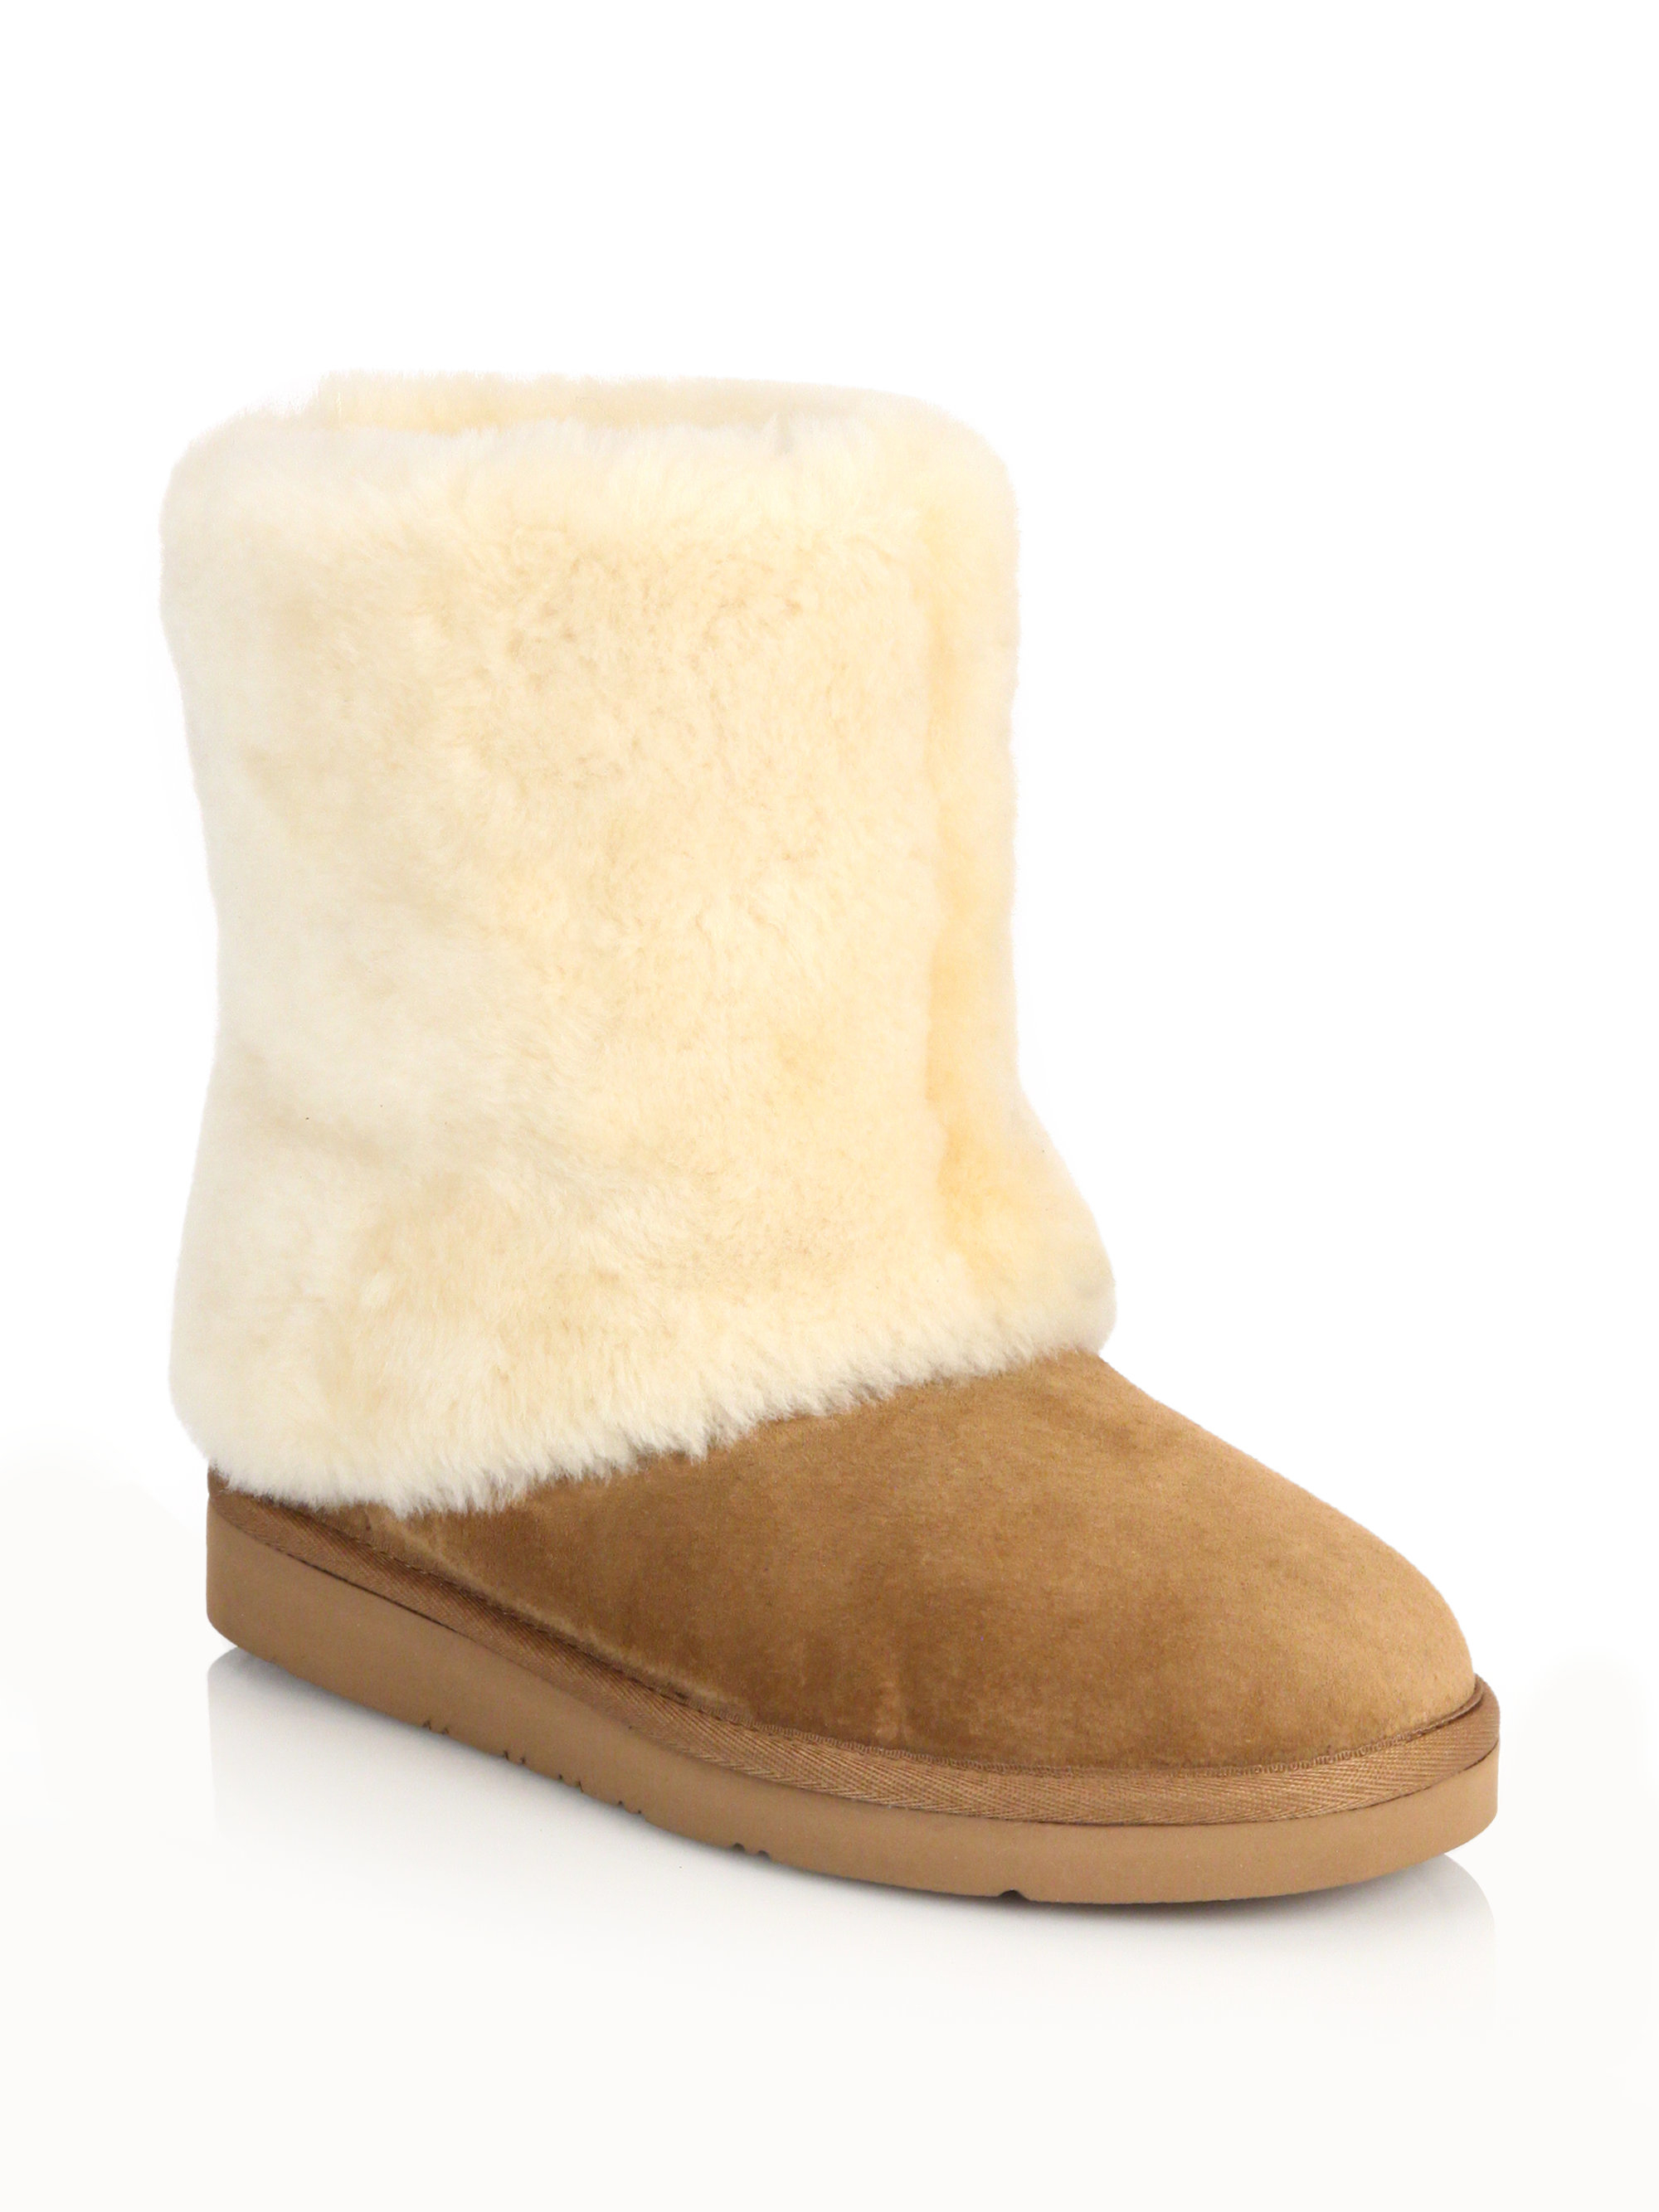 Lyst - Ugg Patten Shearling & Suede Boots in Brown